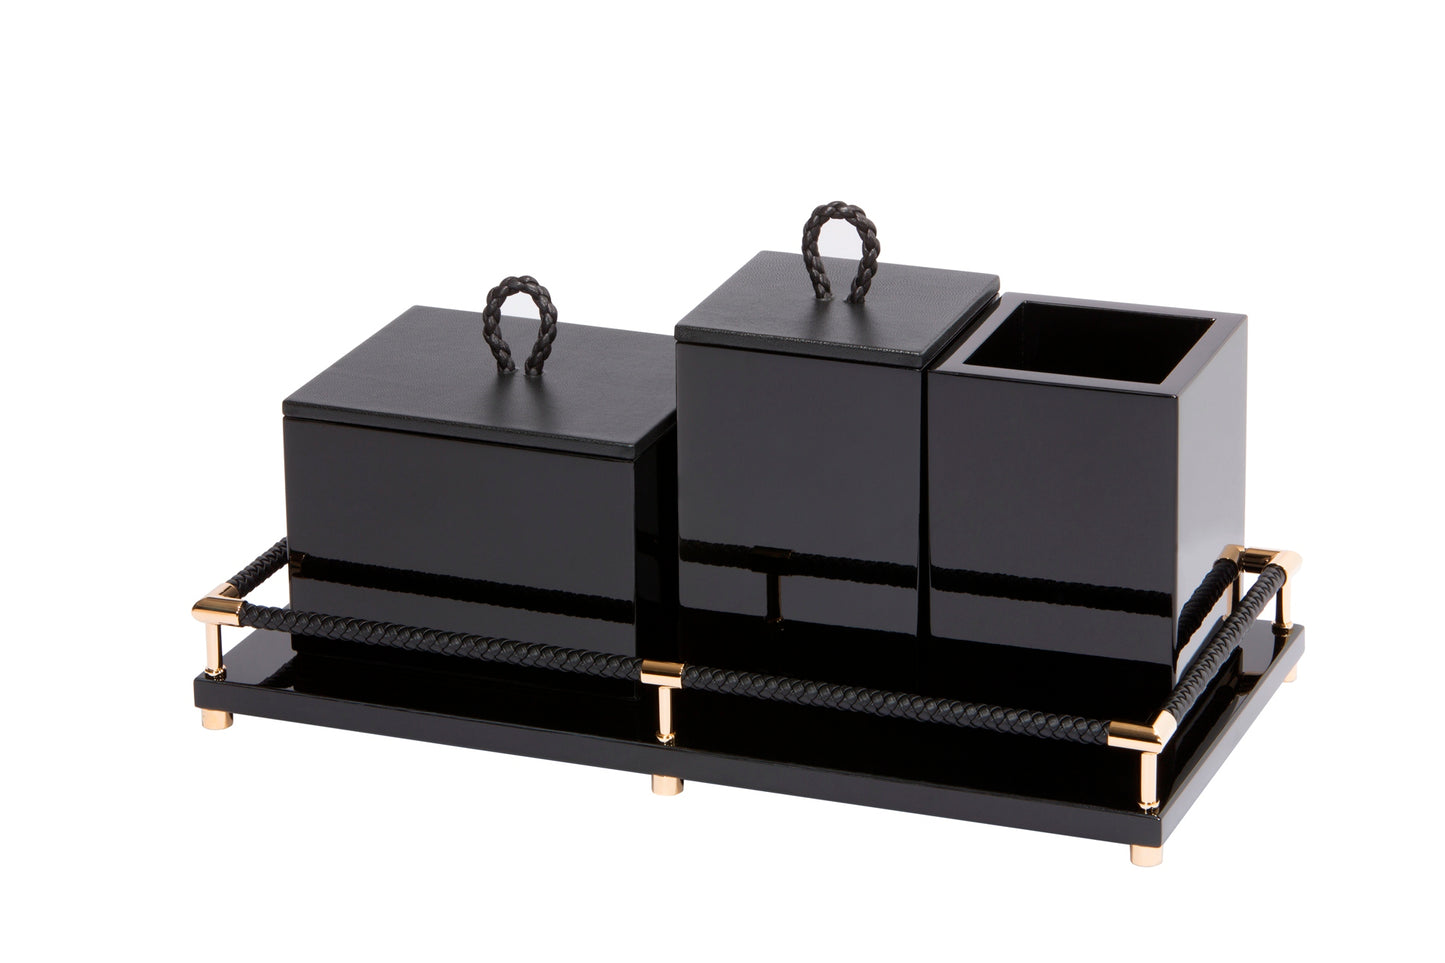 Riviere Thea Lacquered Wood Tray with Braided Leather Railing | Rectangular Vanity Tray | Lacquered Wood Base | Braided Leather Railing | Chrome or Gold Details | Perfect for Vanity Organization | Explore Luxury Home Accessories at 2Jour Concierge, #1 luxury high-end gift & lifestyle shop